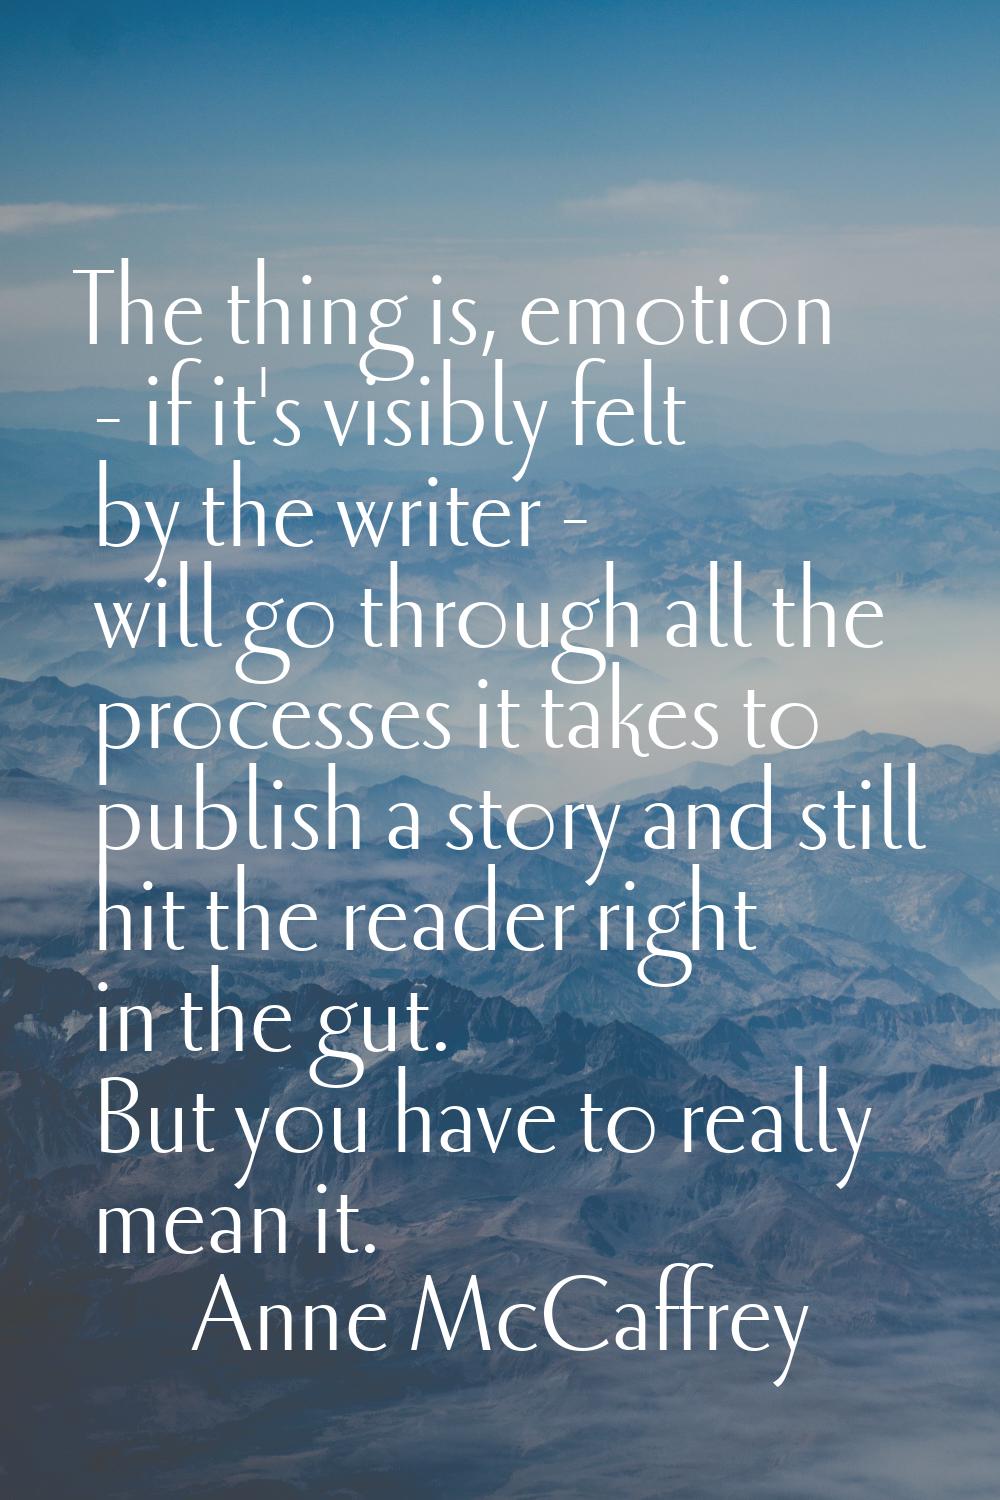 The thing is, emotion - if it's visibly felt by the writer - will go through all the processes it t